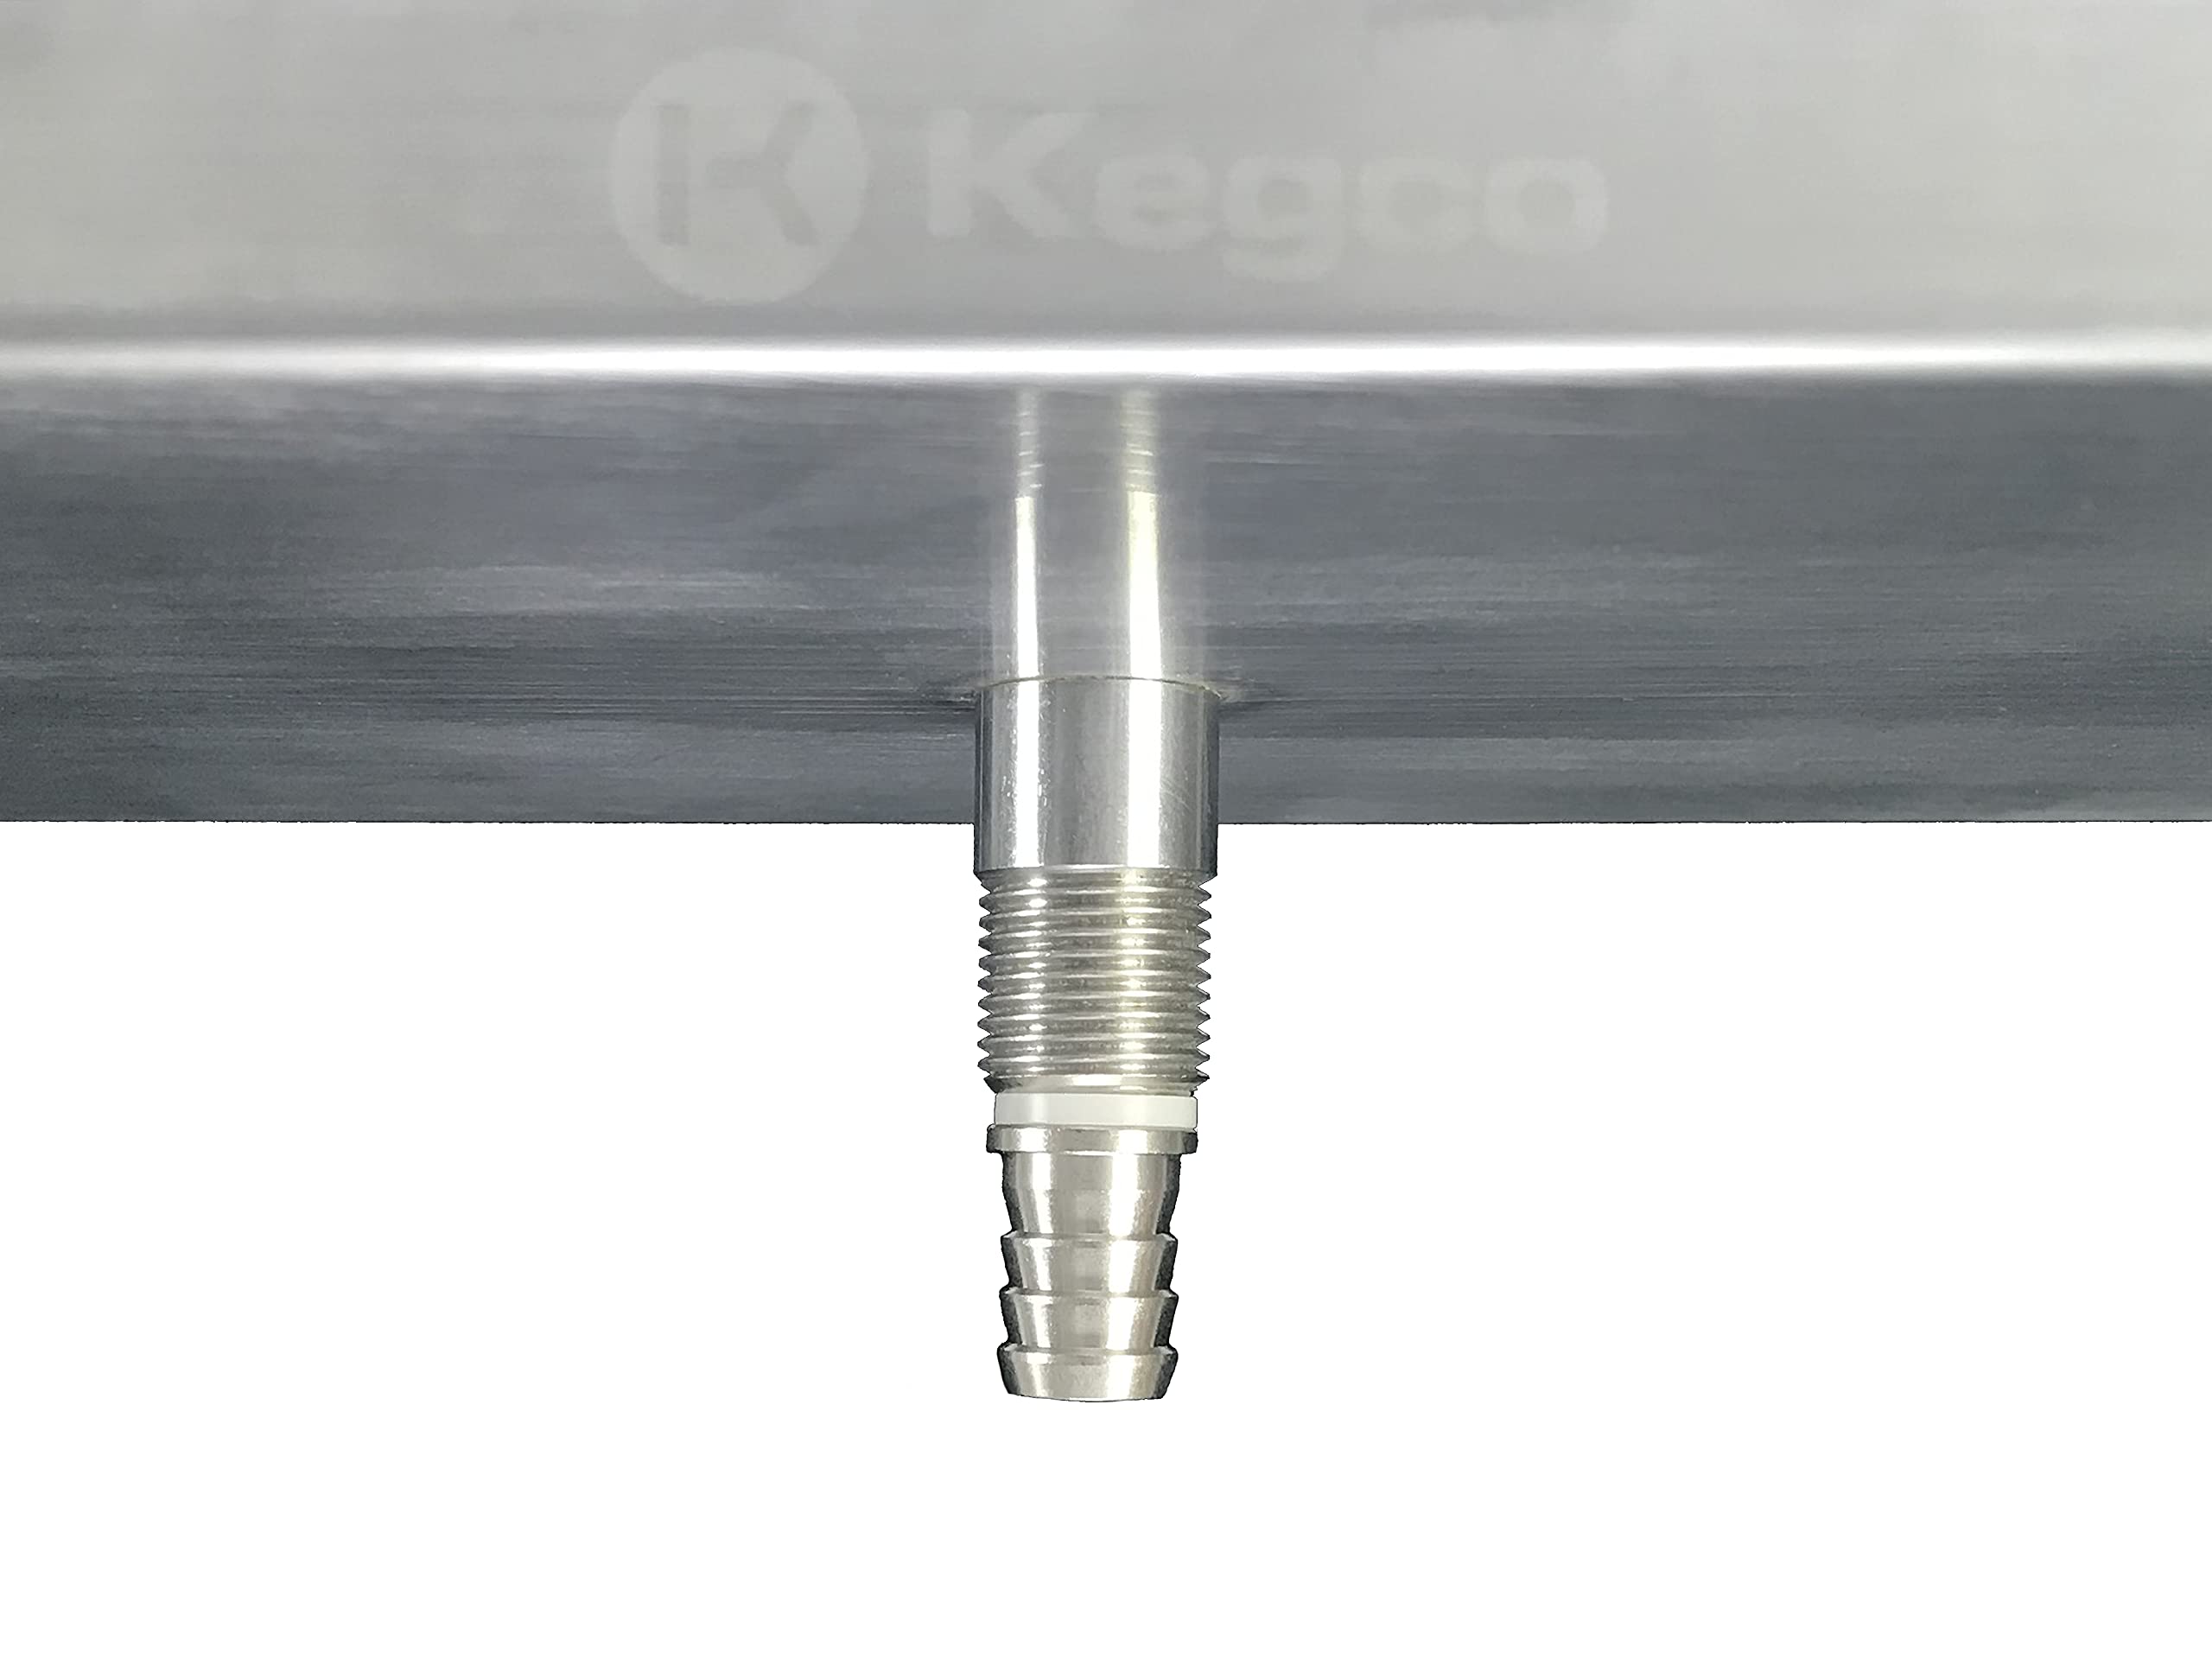 Kegco SECO-1610D 16" x 10" Surface Mount Drip Tray - 3" Column Cut-Out - SS, with Drain